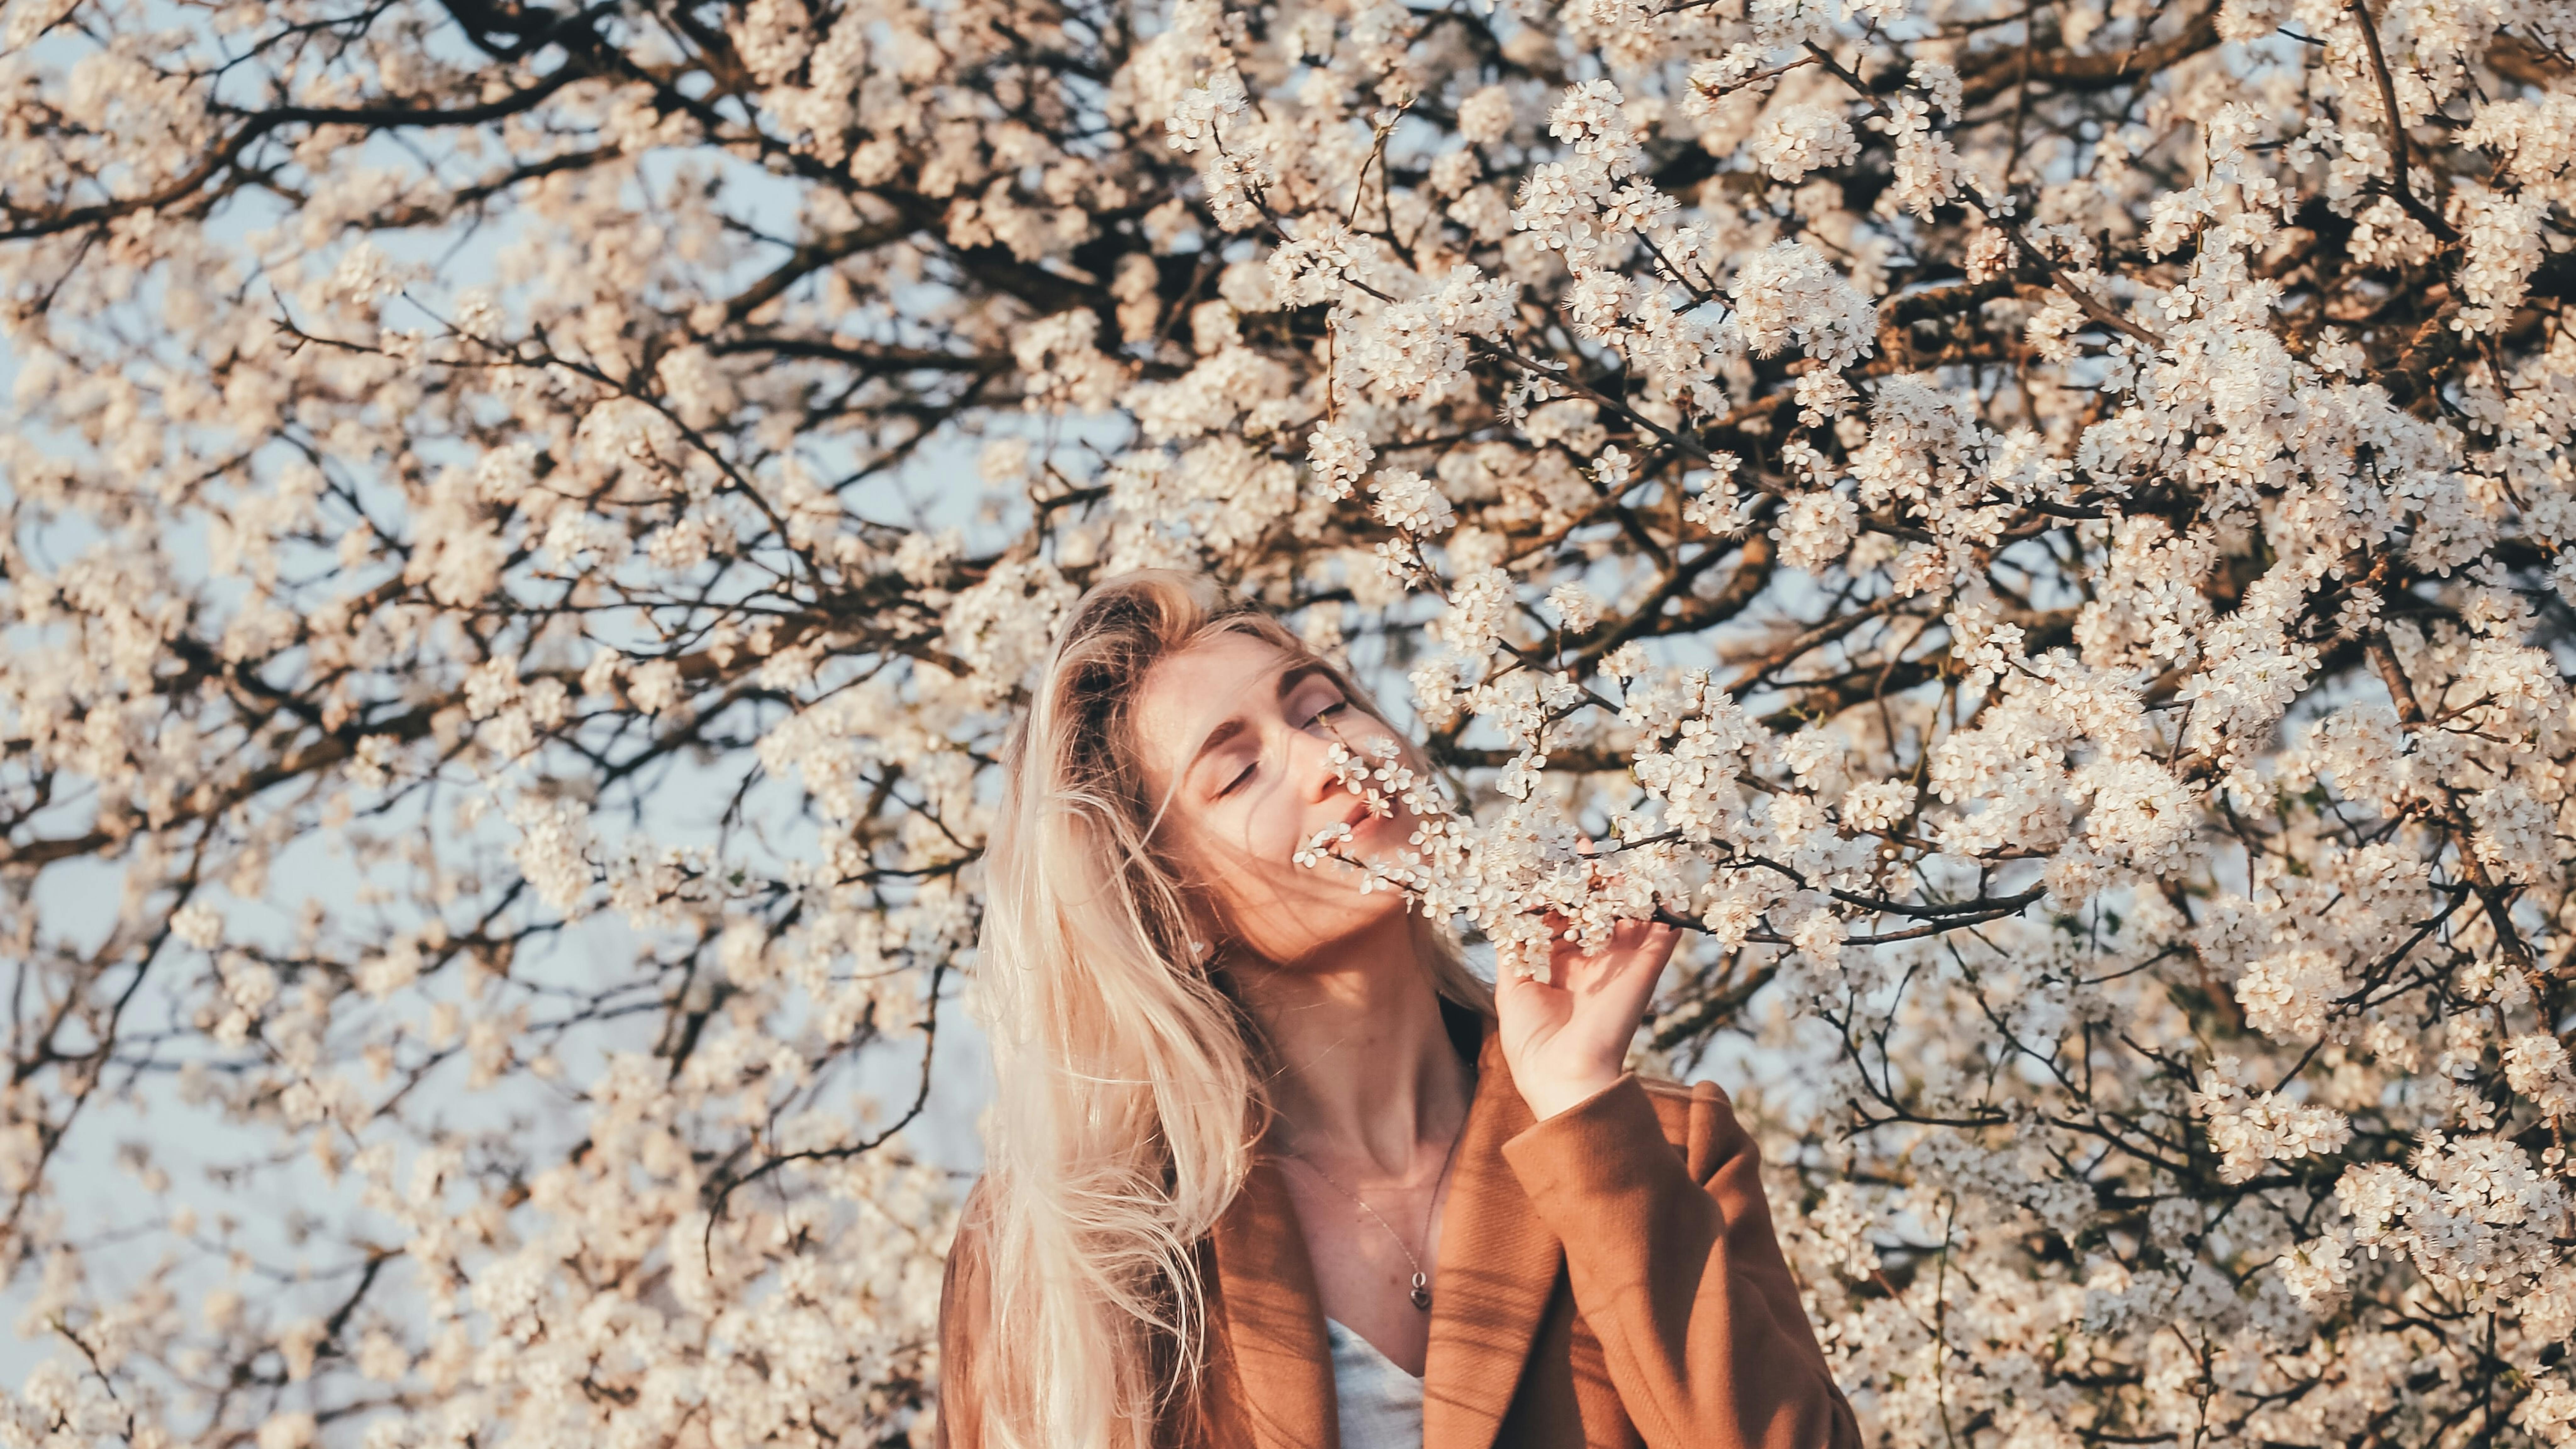 A women surrounded by cherry blossoms.